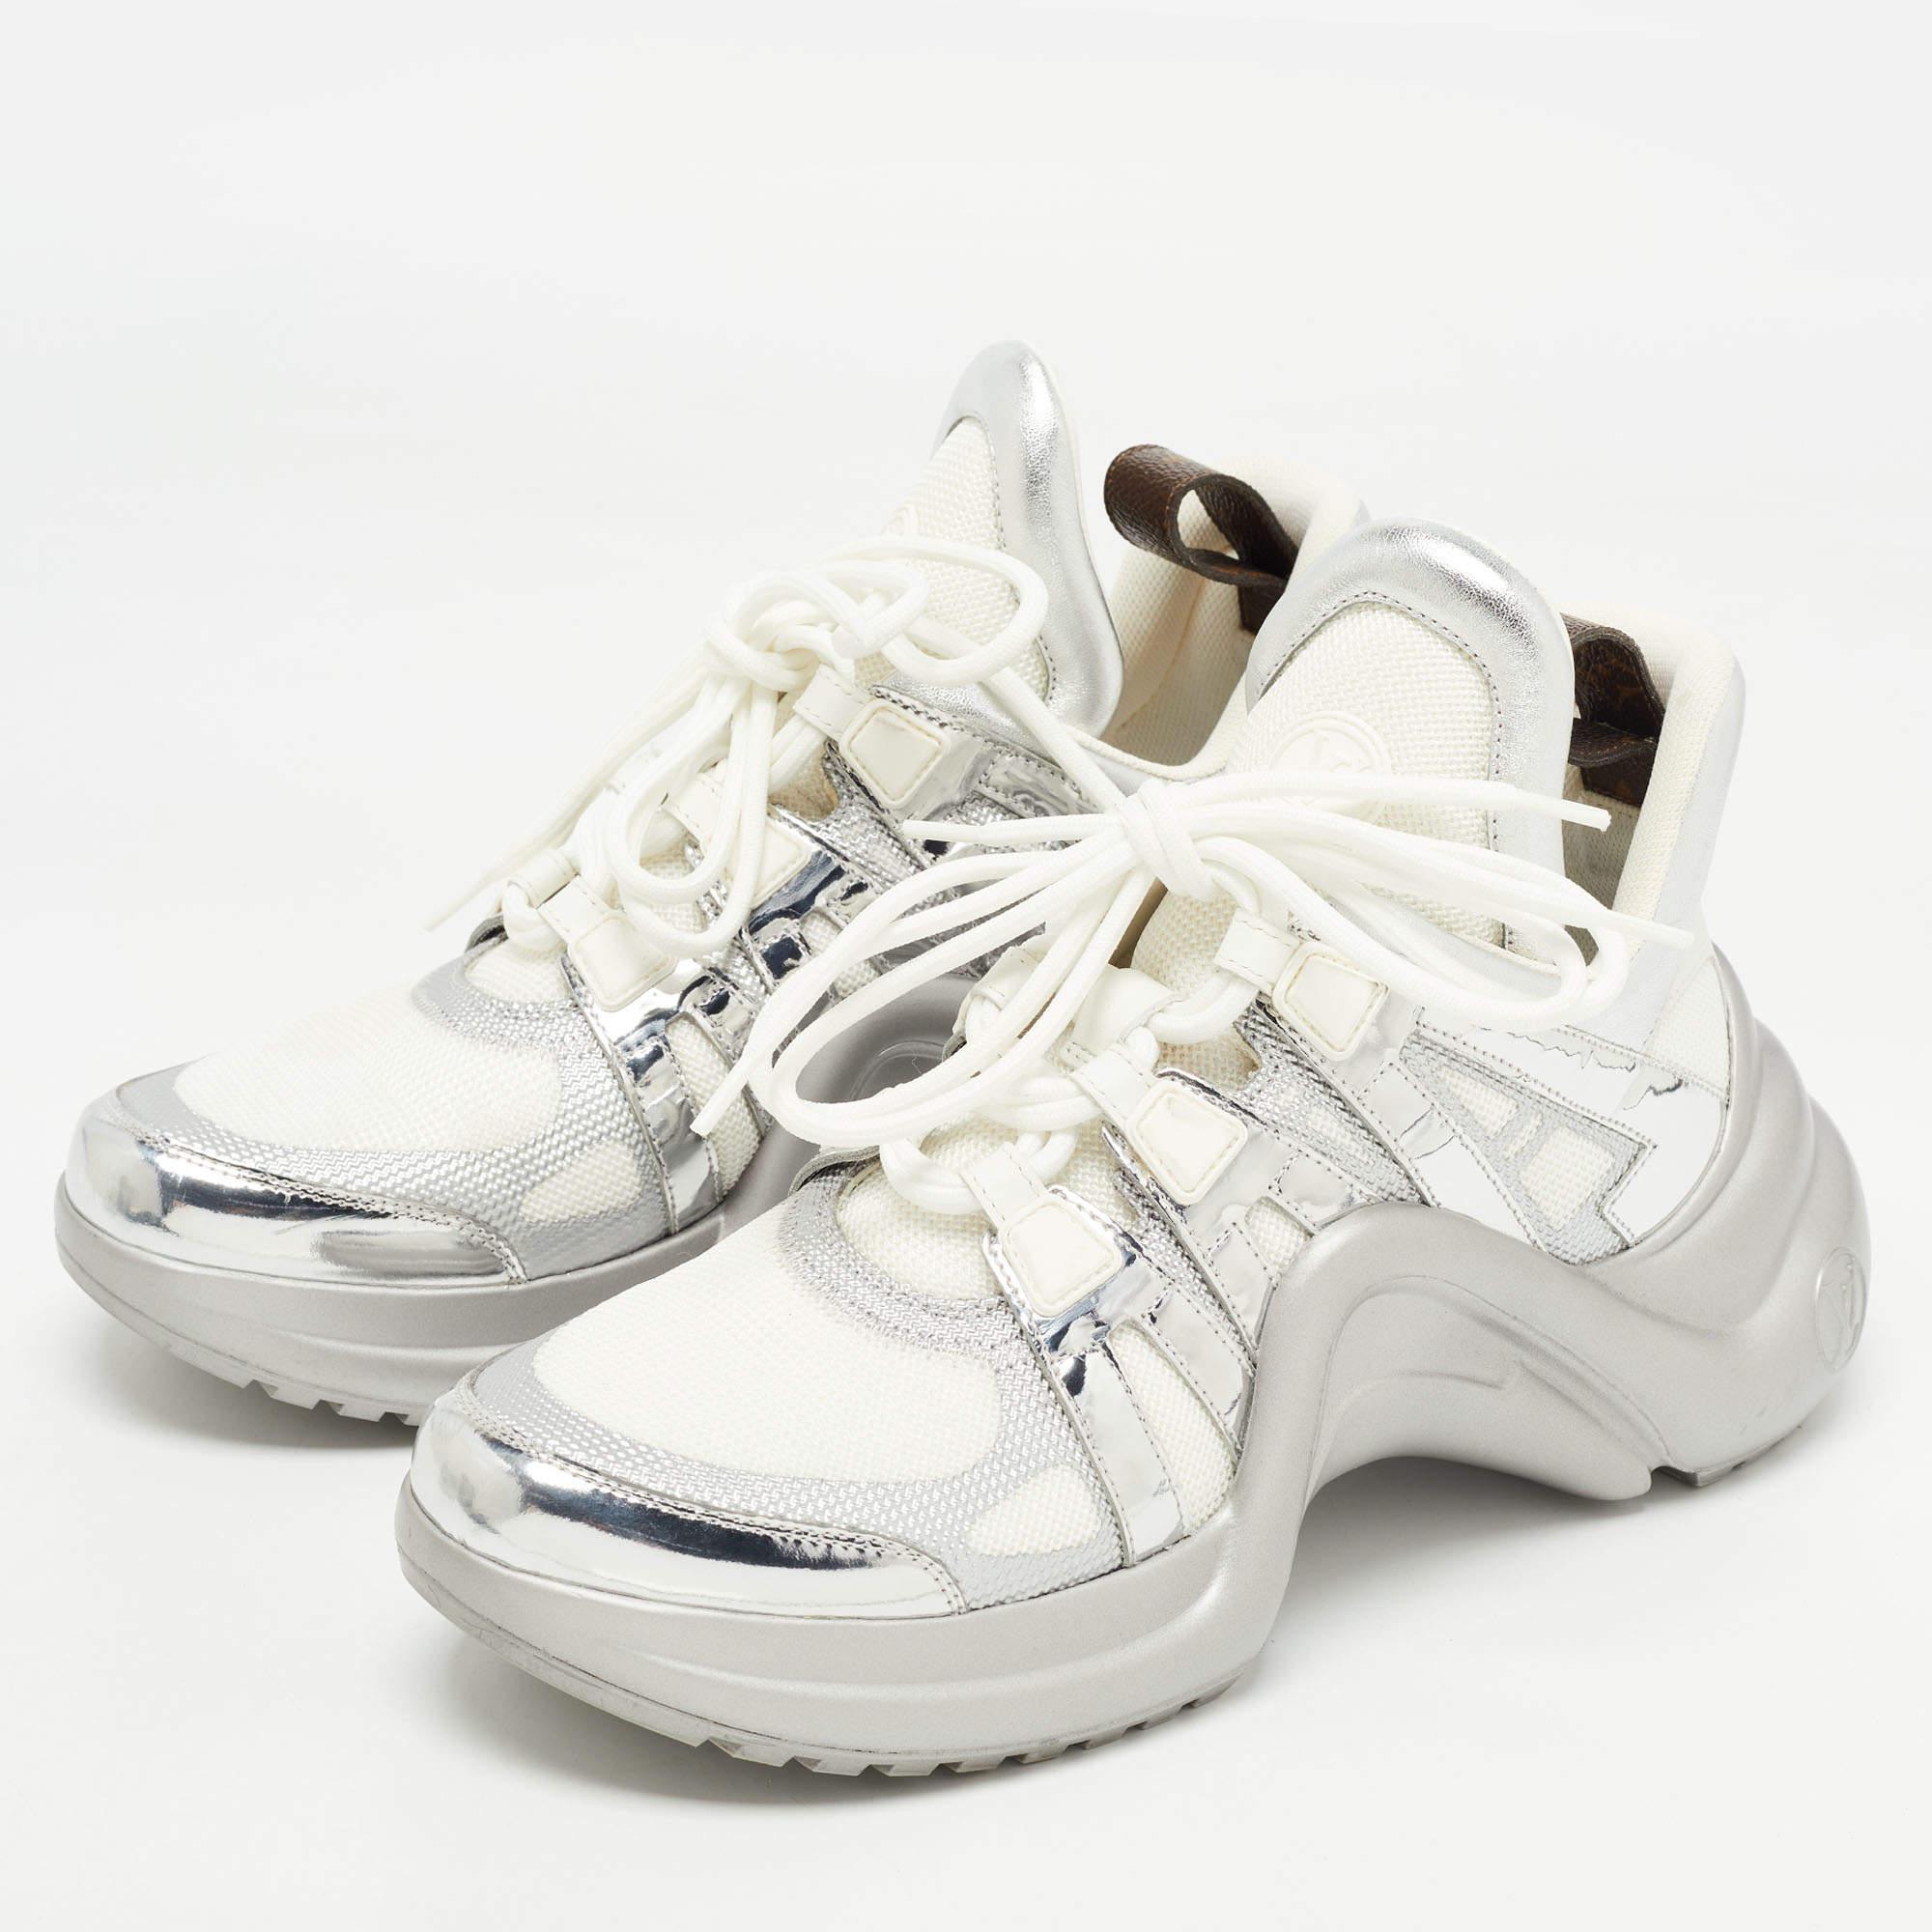 Women's Louis Vuitton Silver/White Leather and Mesh Archlight Sneakers Size 39